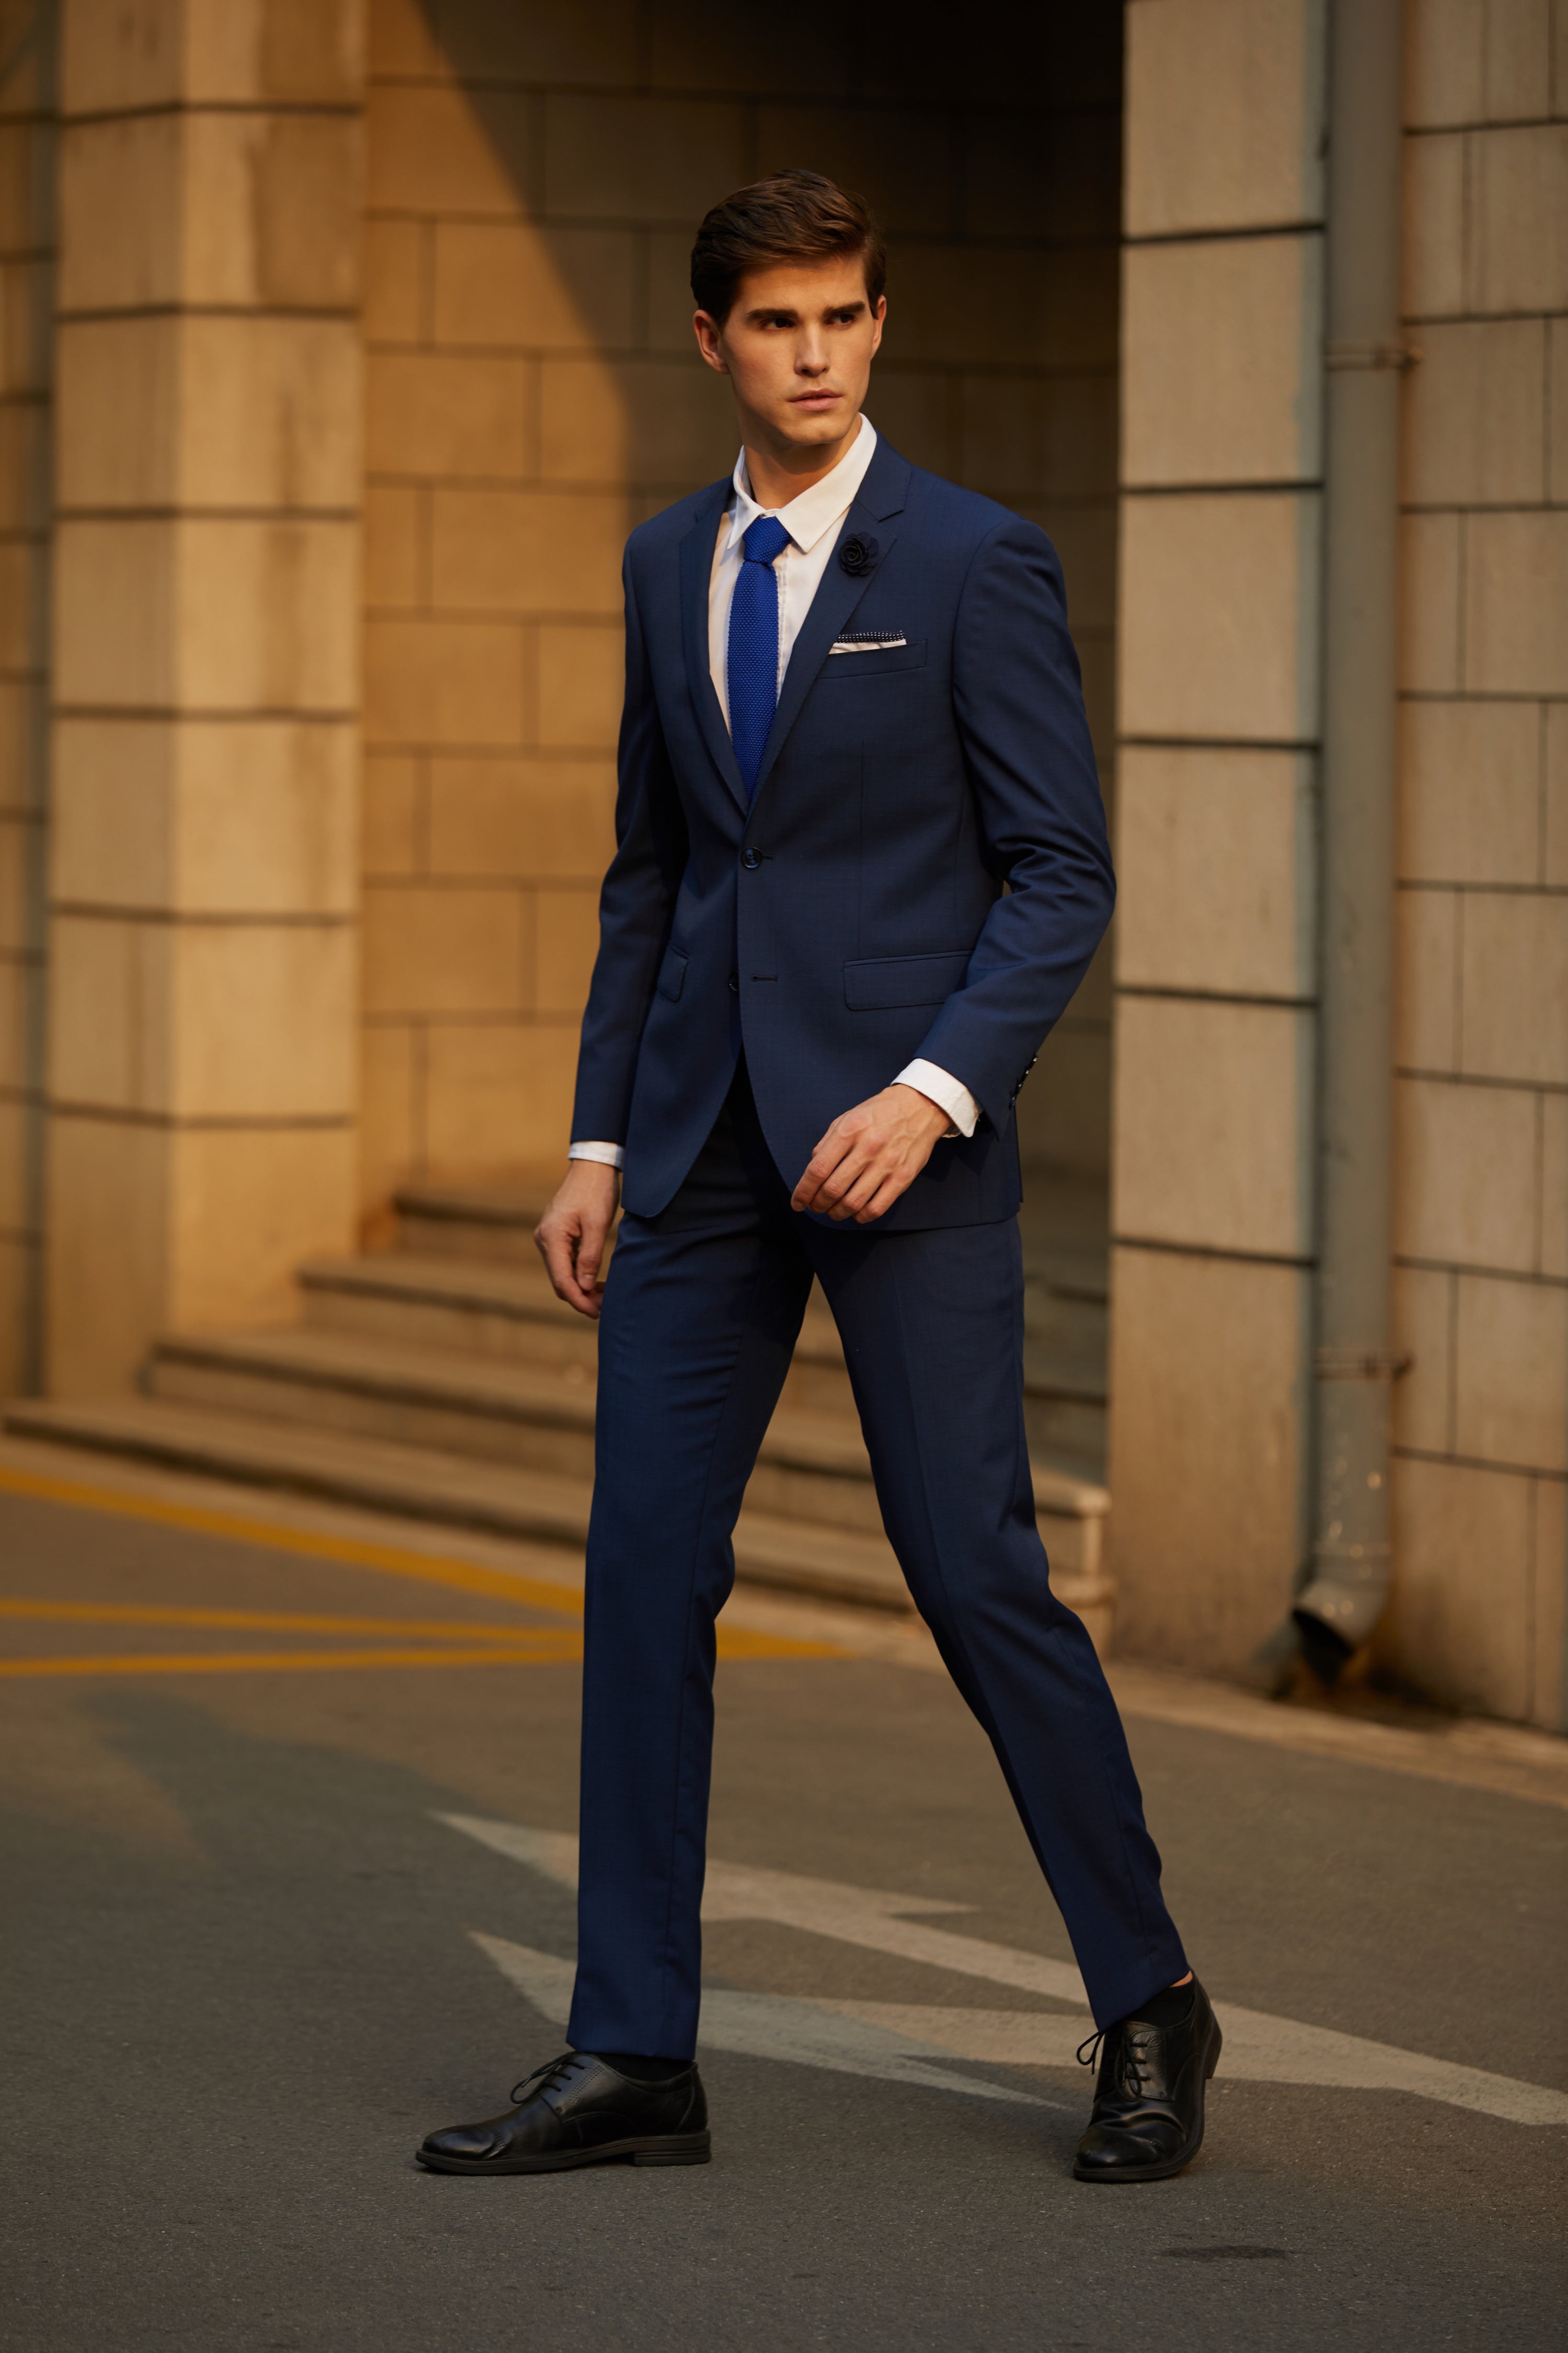 The Savile Row Company - Now is the perfect time to invest in some timeless  tailoring. This navy stripe double-breasted suit has been reduced to just  £180 in our mid-season sale: https://bit.ly/3jjgxwA |